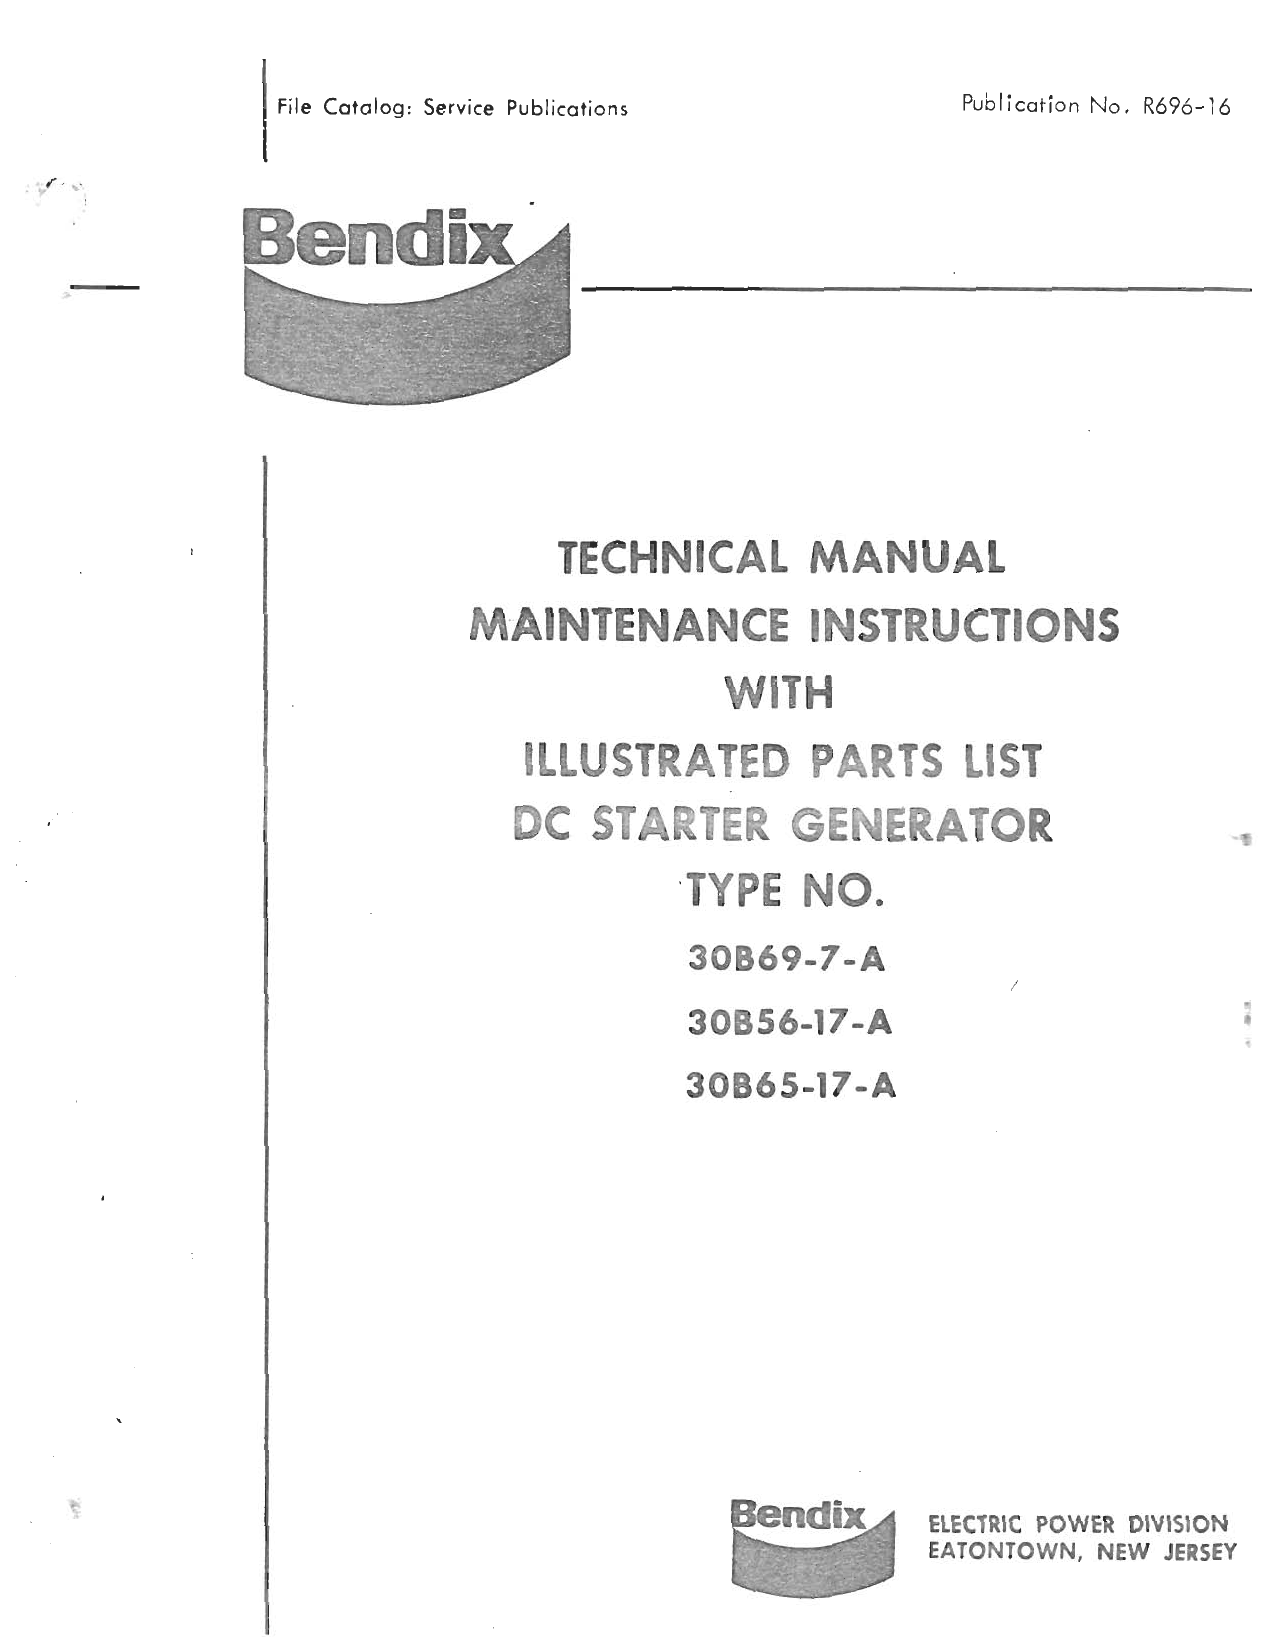 Sample page 1 from AirCorps Library document: Maintenance Instructions with Illustrated Parts List for DC Starter Generator - Type 30B69-7-A, 30B56-17-A, and 30B65-17-A